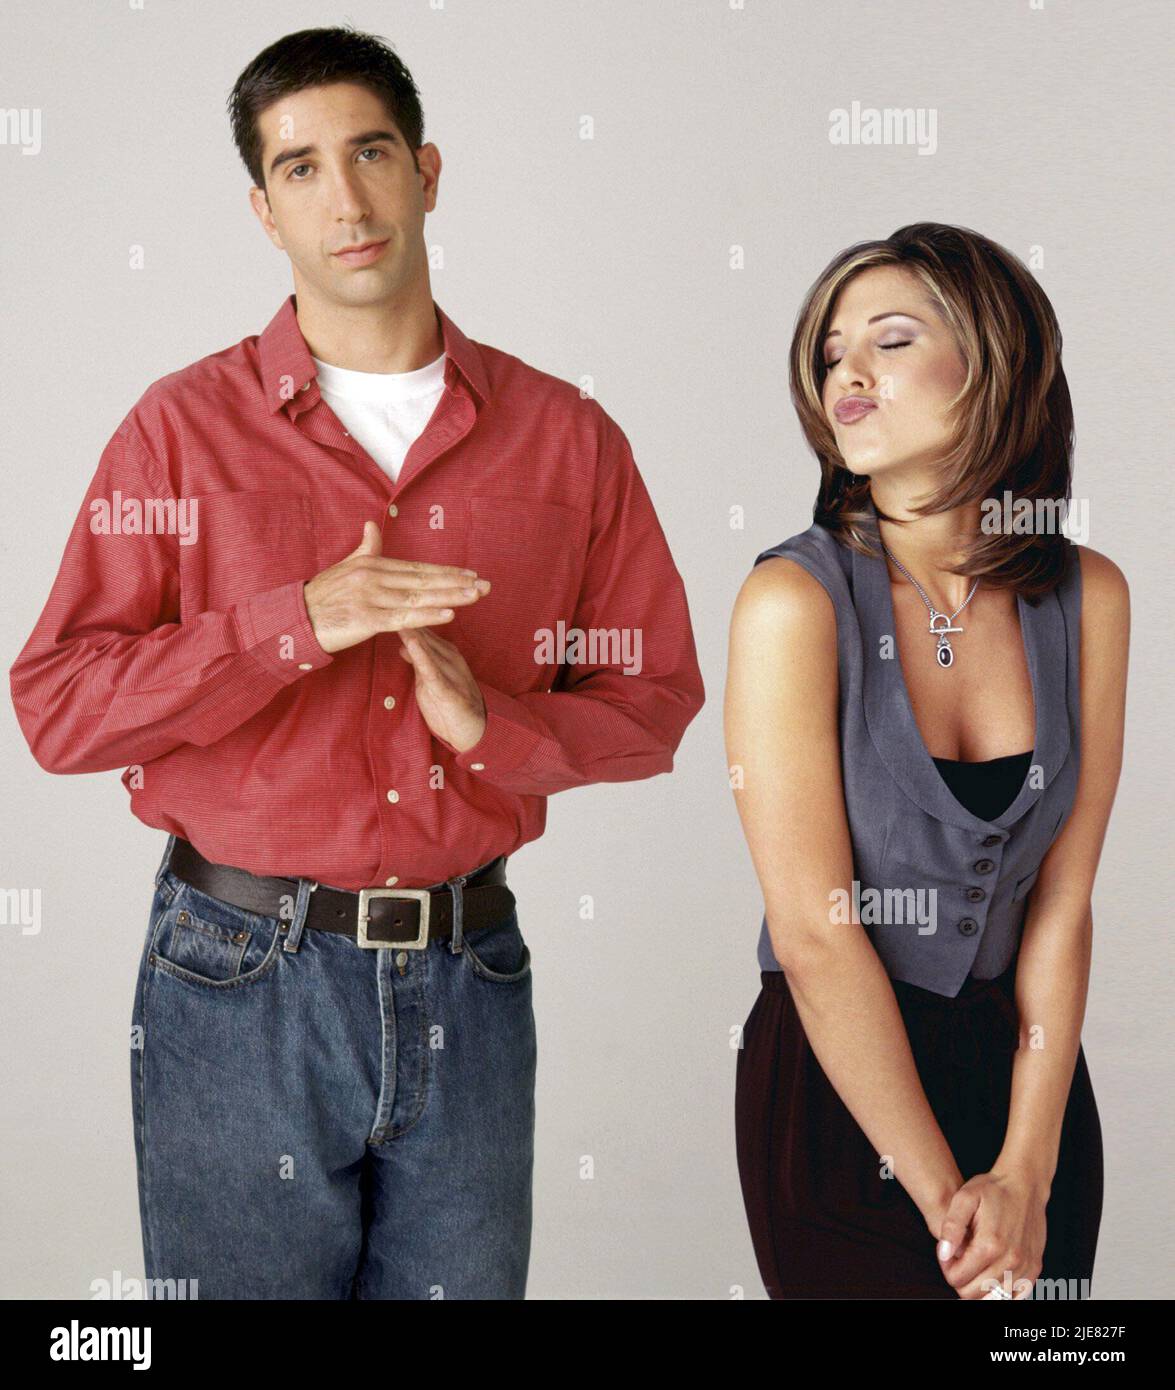 JENNIFER ANISTON and DAVID SCHWIMMER in FRIENDS (1994), directed by PETER BONERZ, GARY HALVORSON, JAMES BURROWS, MICHAEL LEMBECK and GAIL MANCUSO. Credit: WARNER BROS. TELEVISION / Album Stock Photo